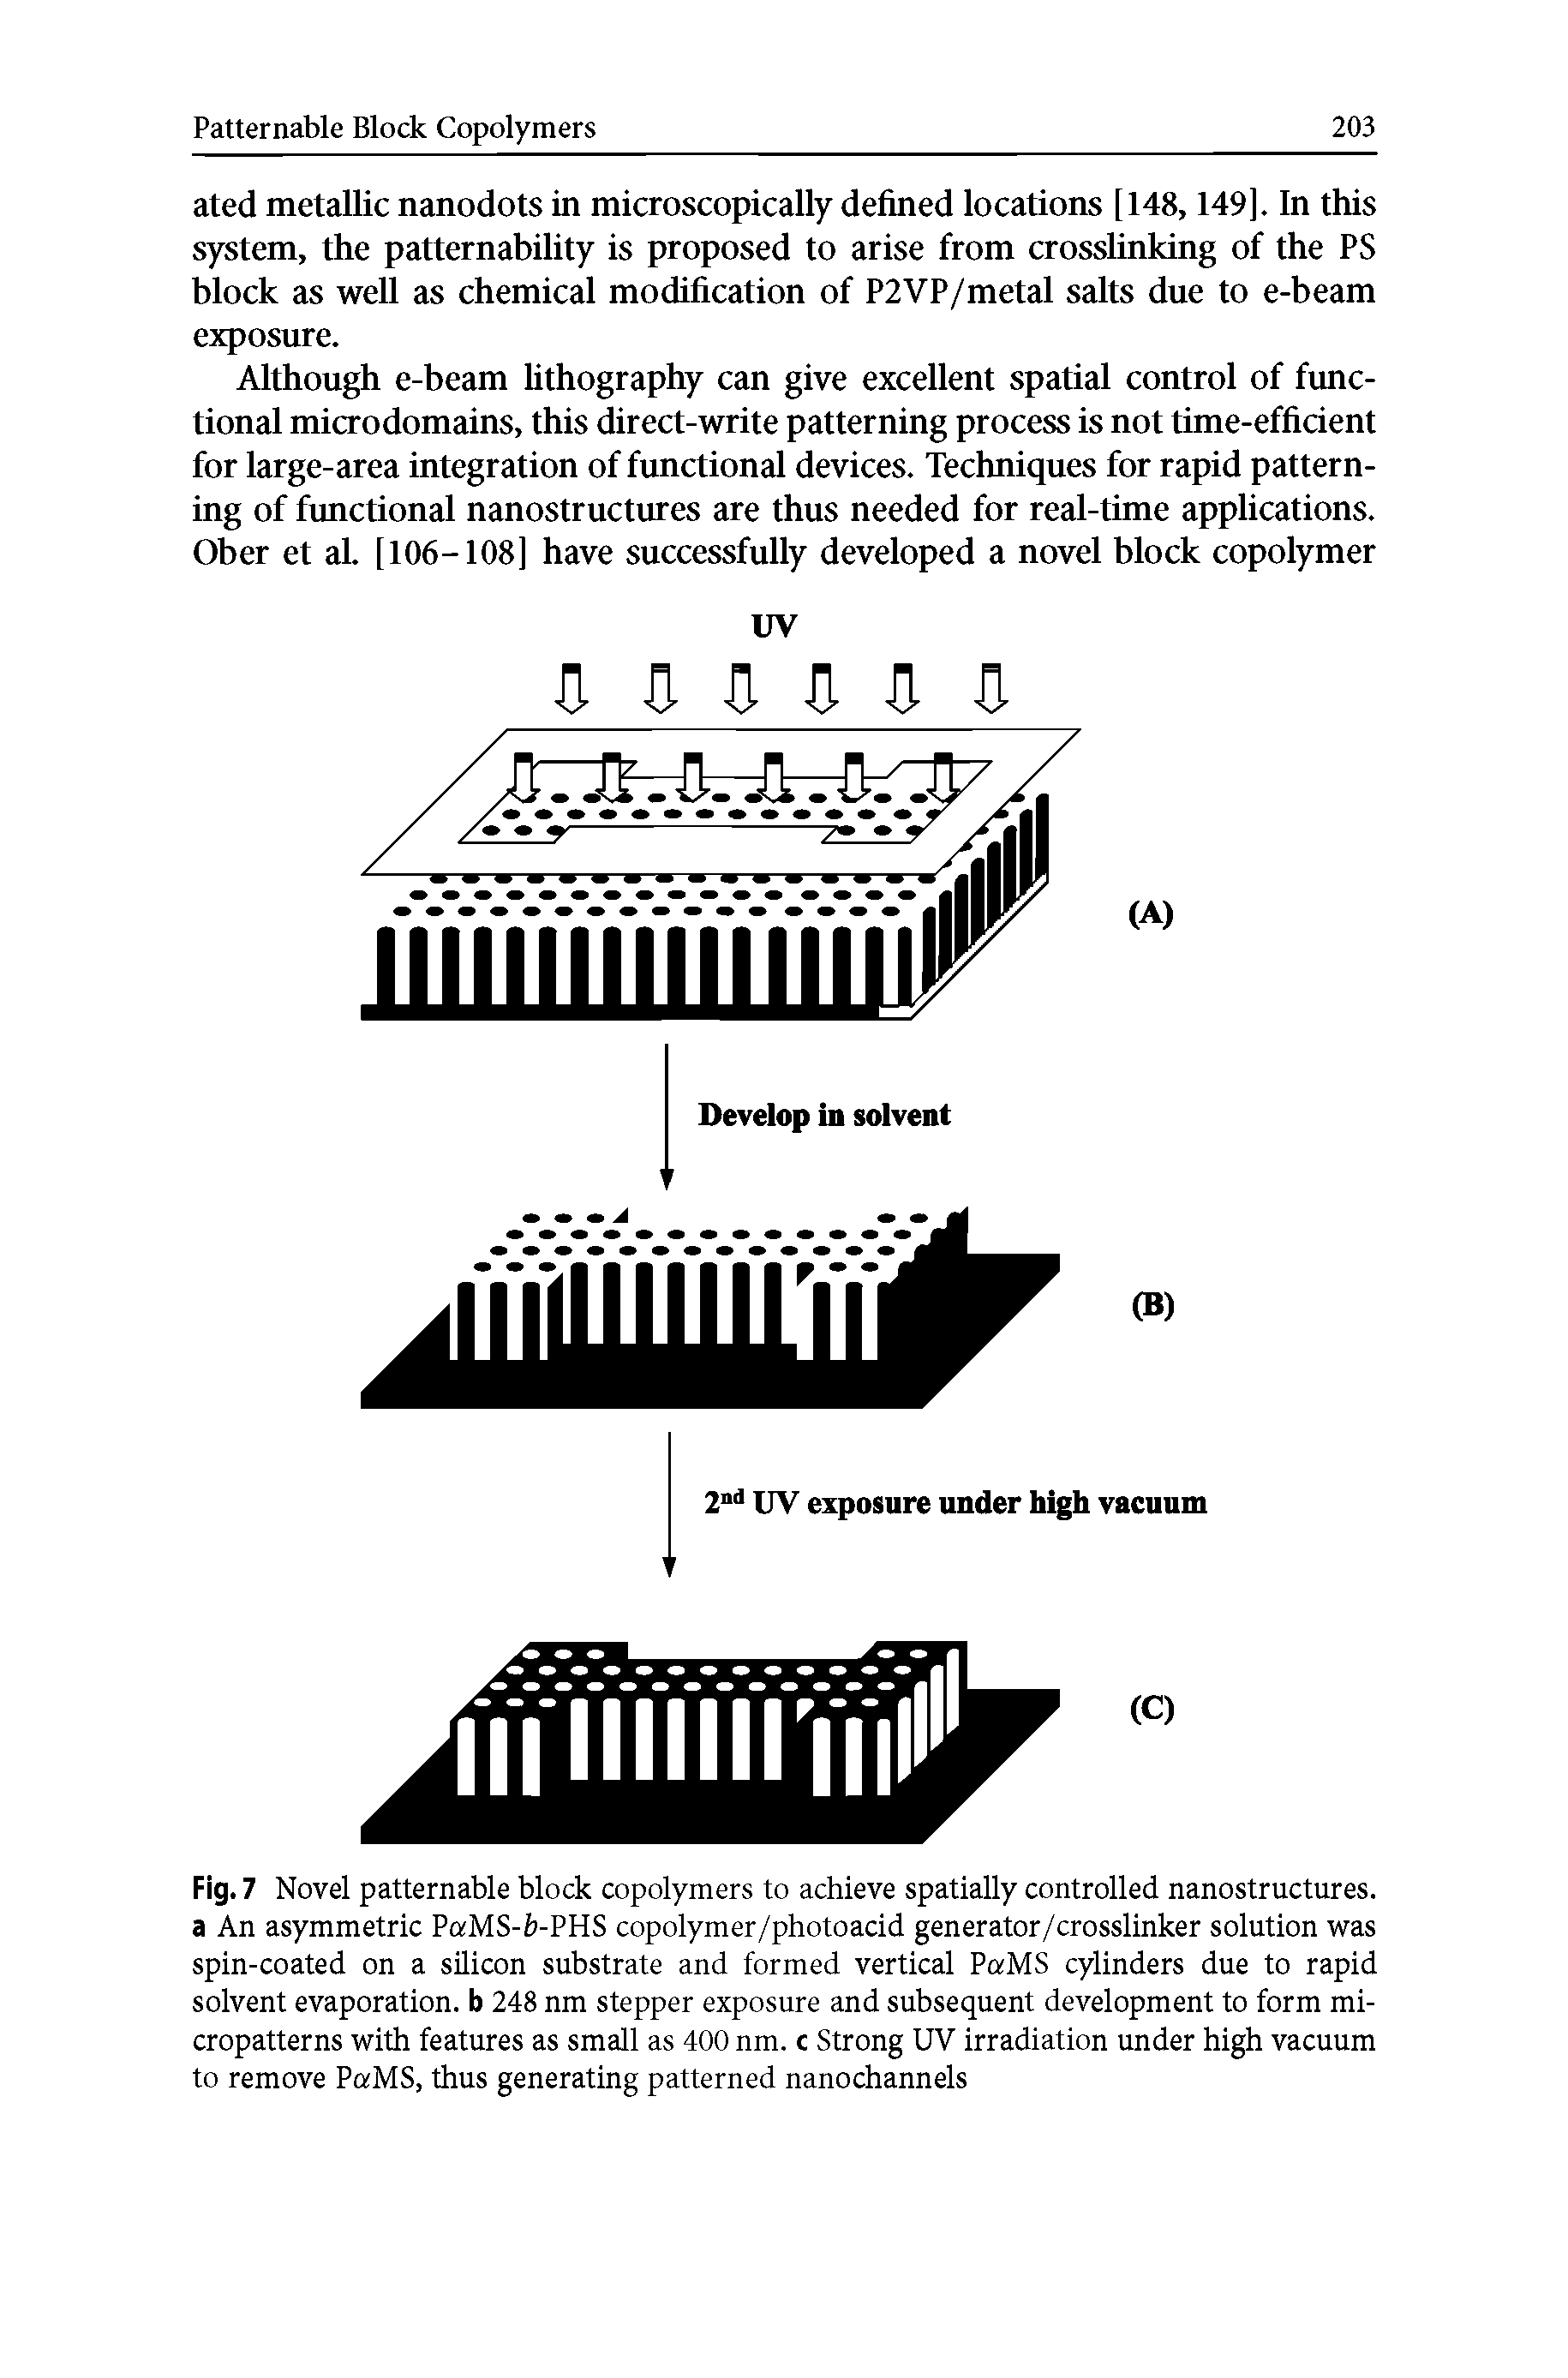 Fig. 7 Novel patternable block copolymers to achieve spatially controlled nanostructures, a An asymmetric PaMS-fc-PHS copolymer/photoacid generator/crosslinker solution was spin-coated on a silicon substrate and formed vertical PaMS cylinders due to rapid solvent evaporation, b 248 nm stepper exposure and subsequent development to form micropatterns with features as small as 400 nm. c Strong UV irradiation under high vacuum to remove PaMS, thus generating patterned nanochannels...